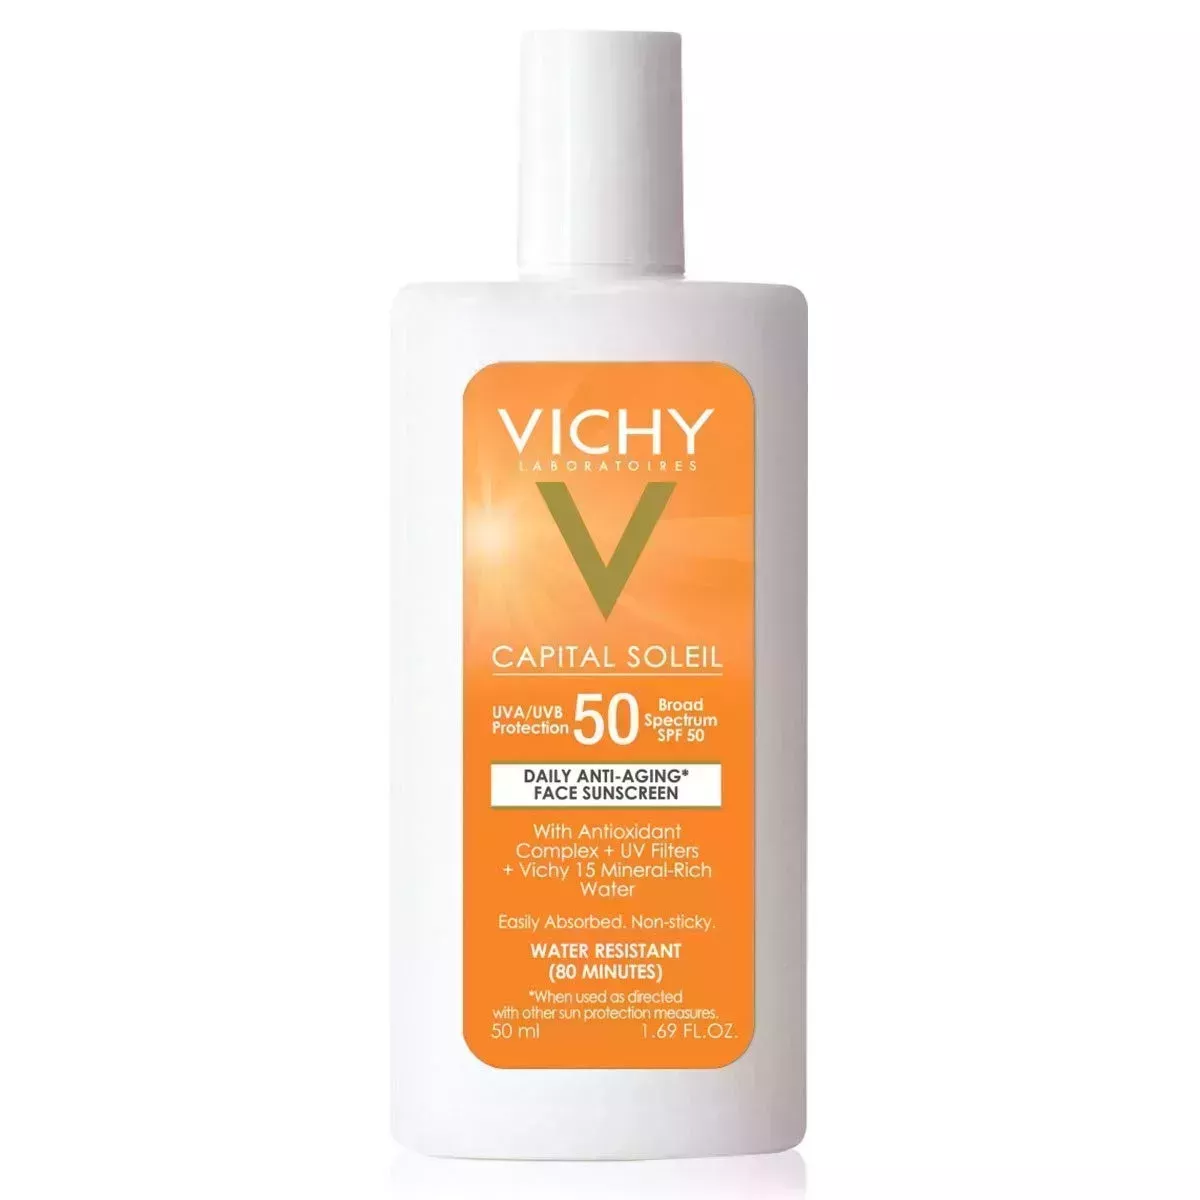 Vichy Capital Soleil Face Sunscreen SPF 50 on white background